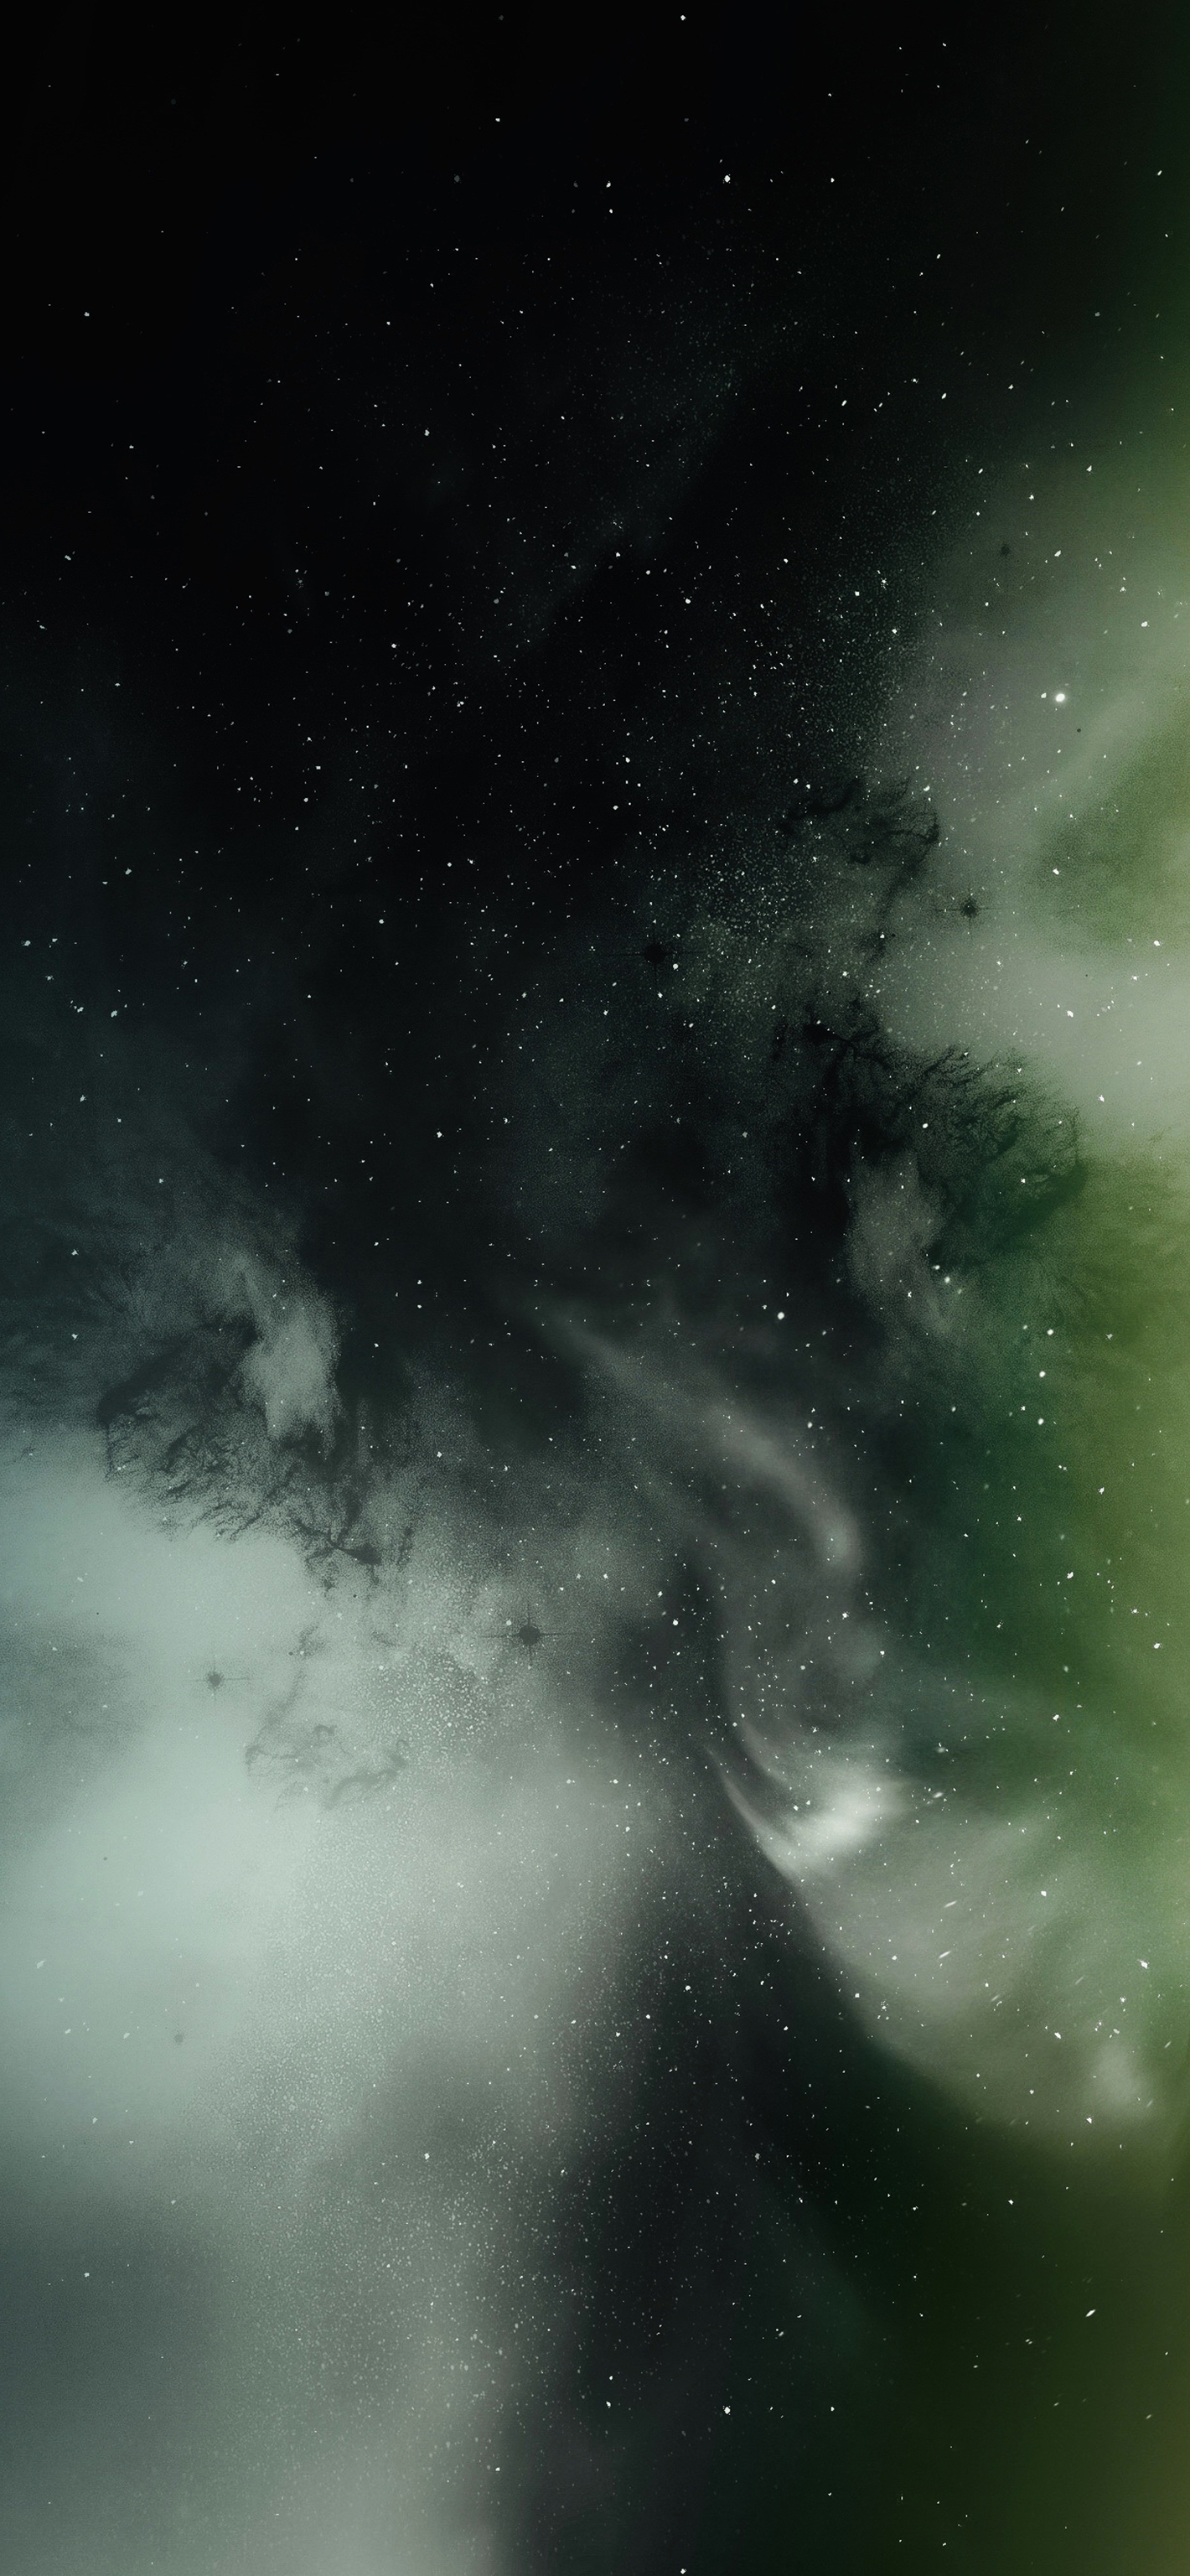 Green Galaxy - Wallpapers Central